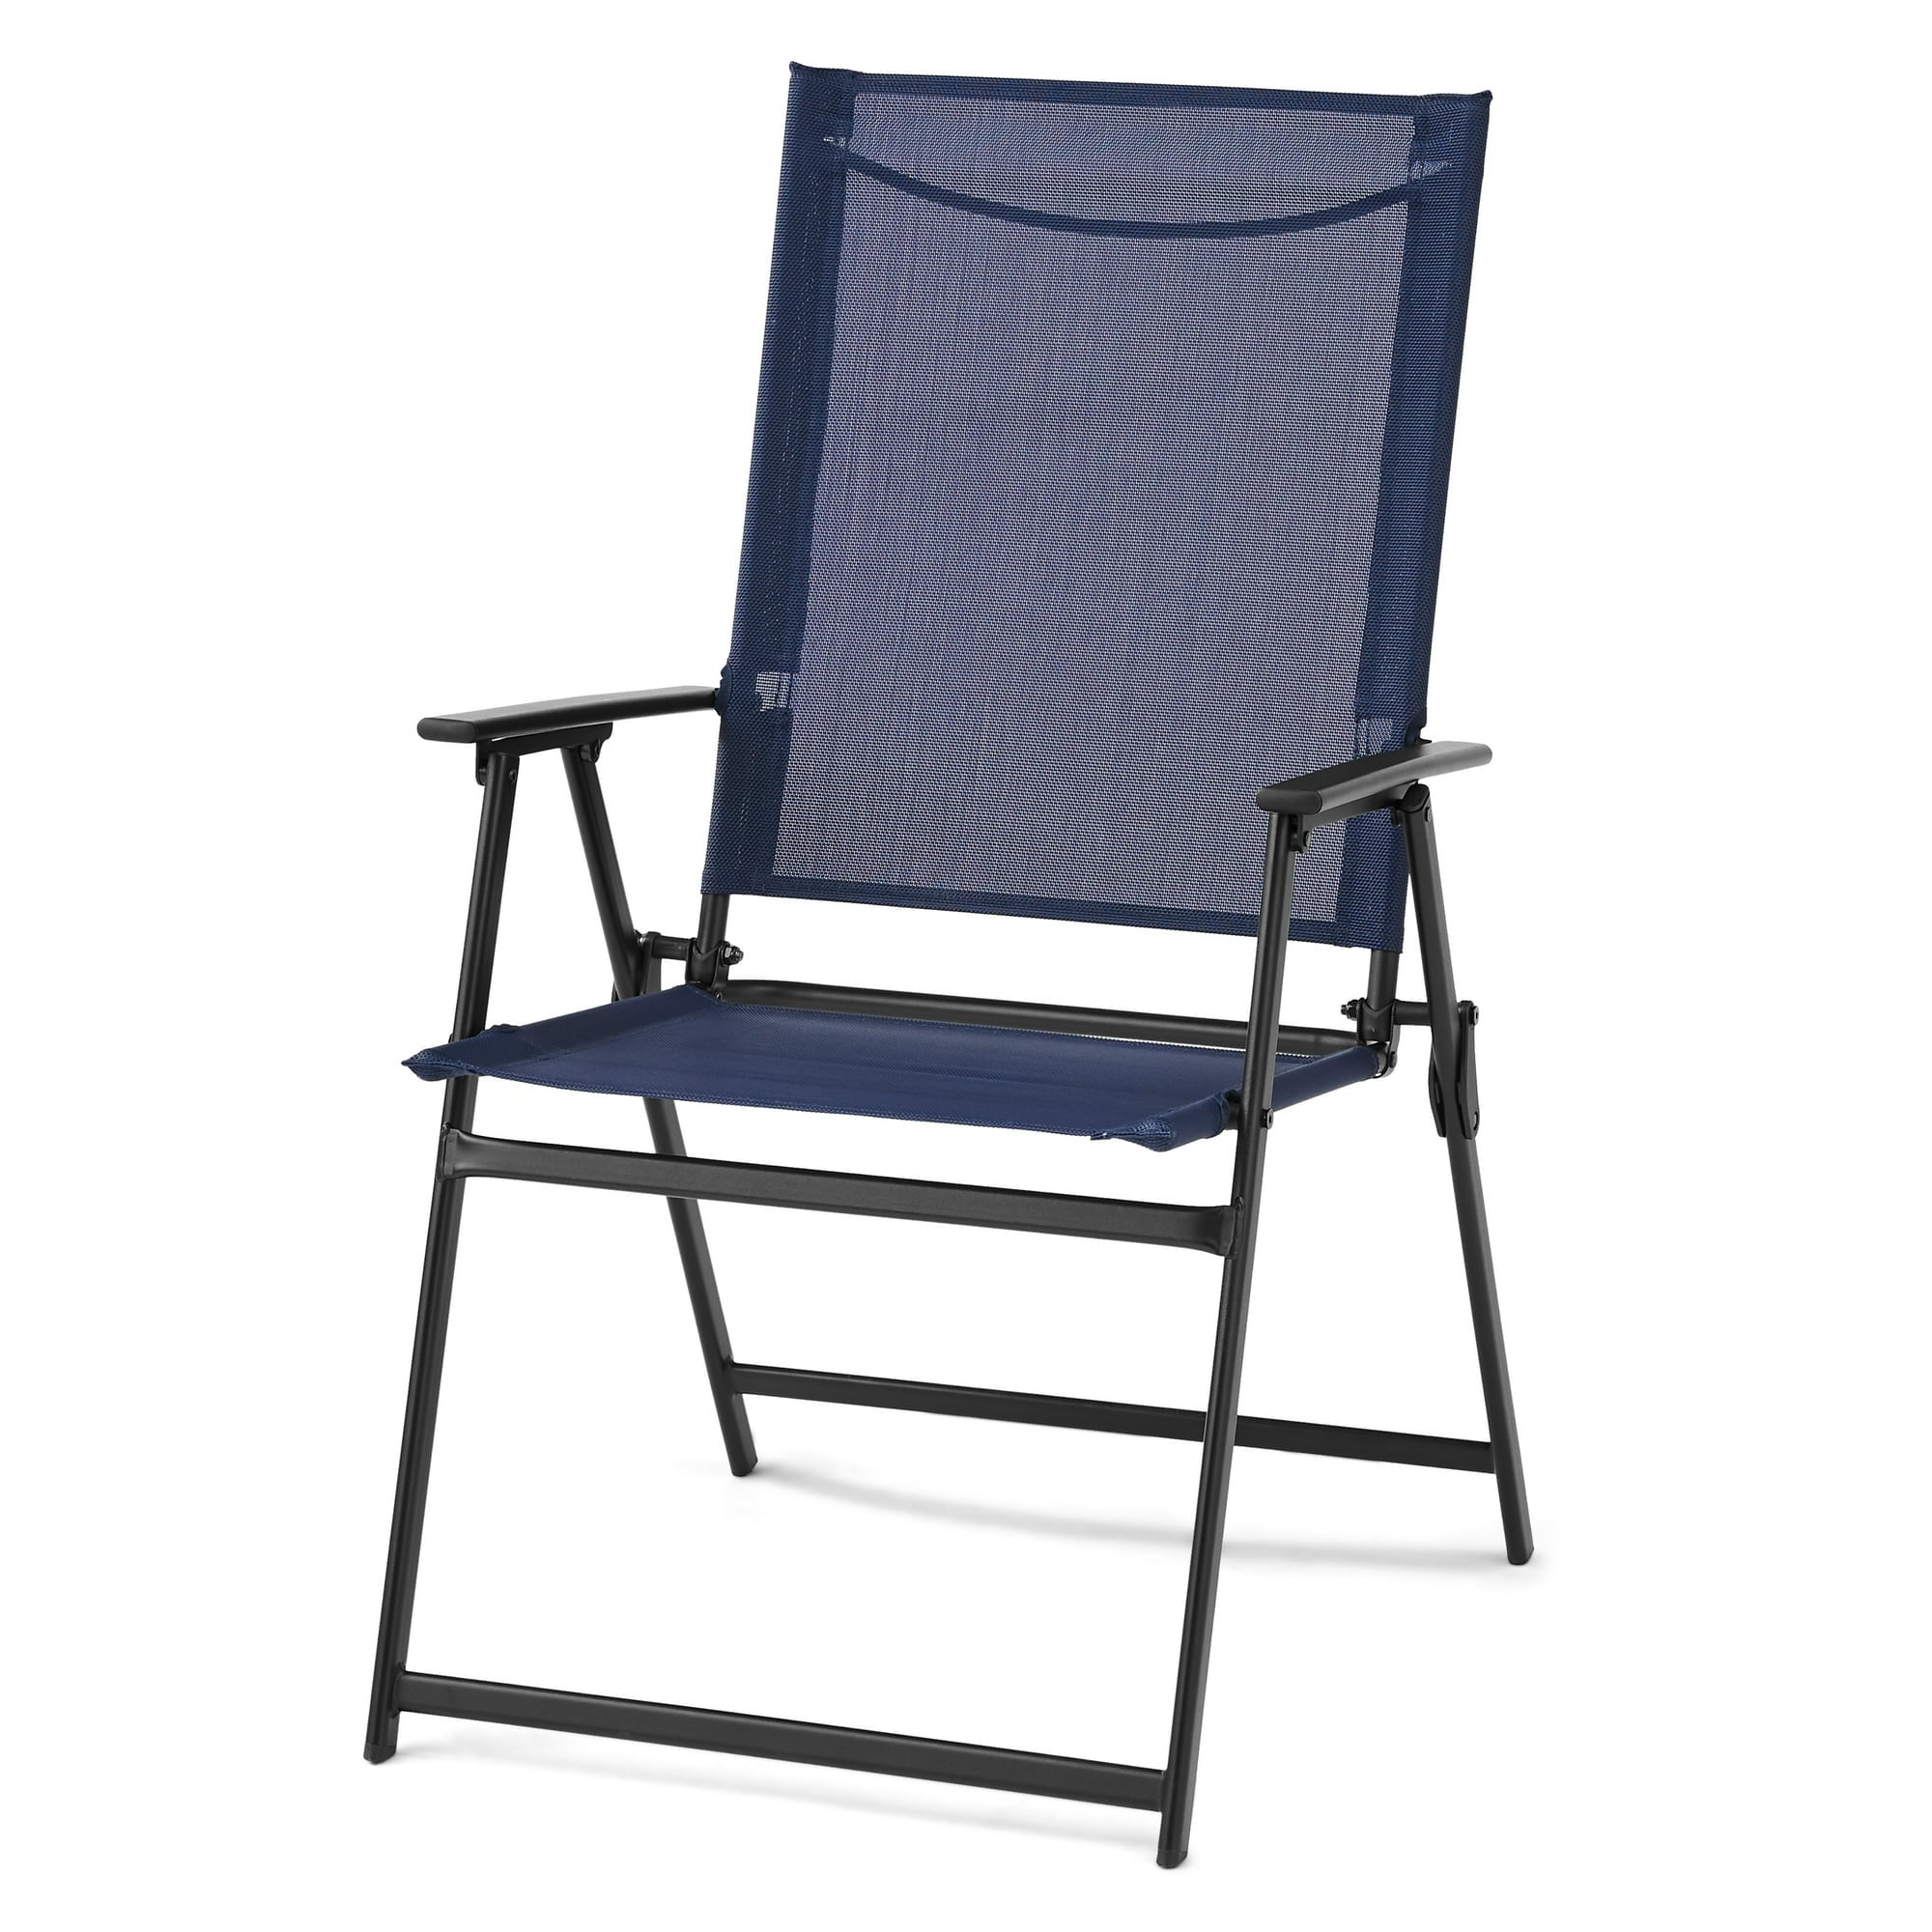 Square Set Of 2 Outdoor Patio Steel Sling Folding Chair